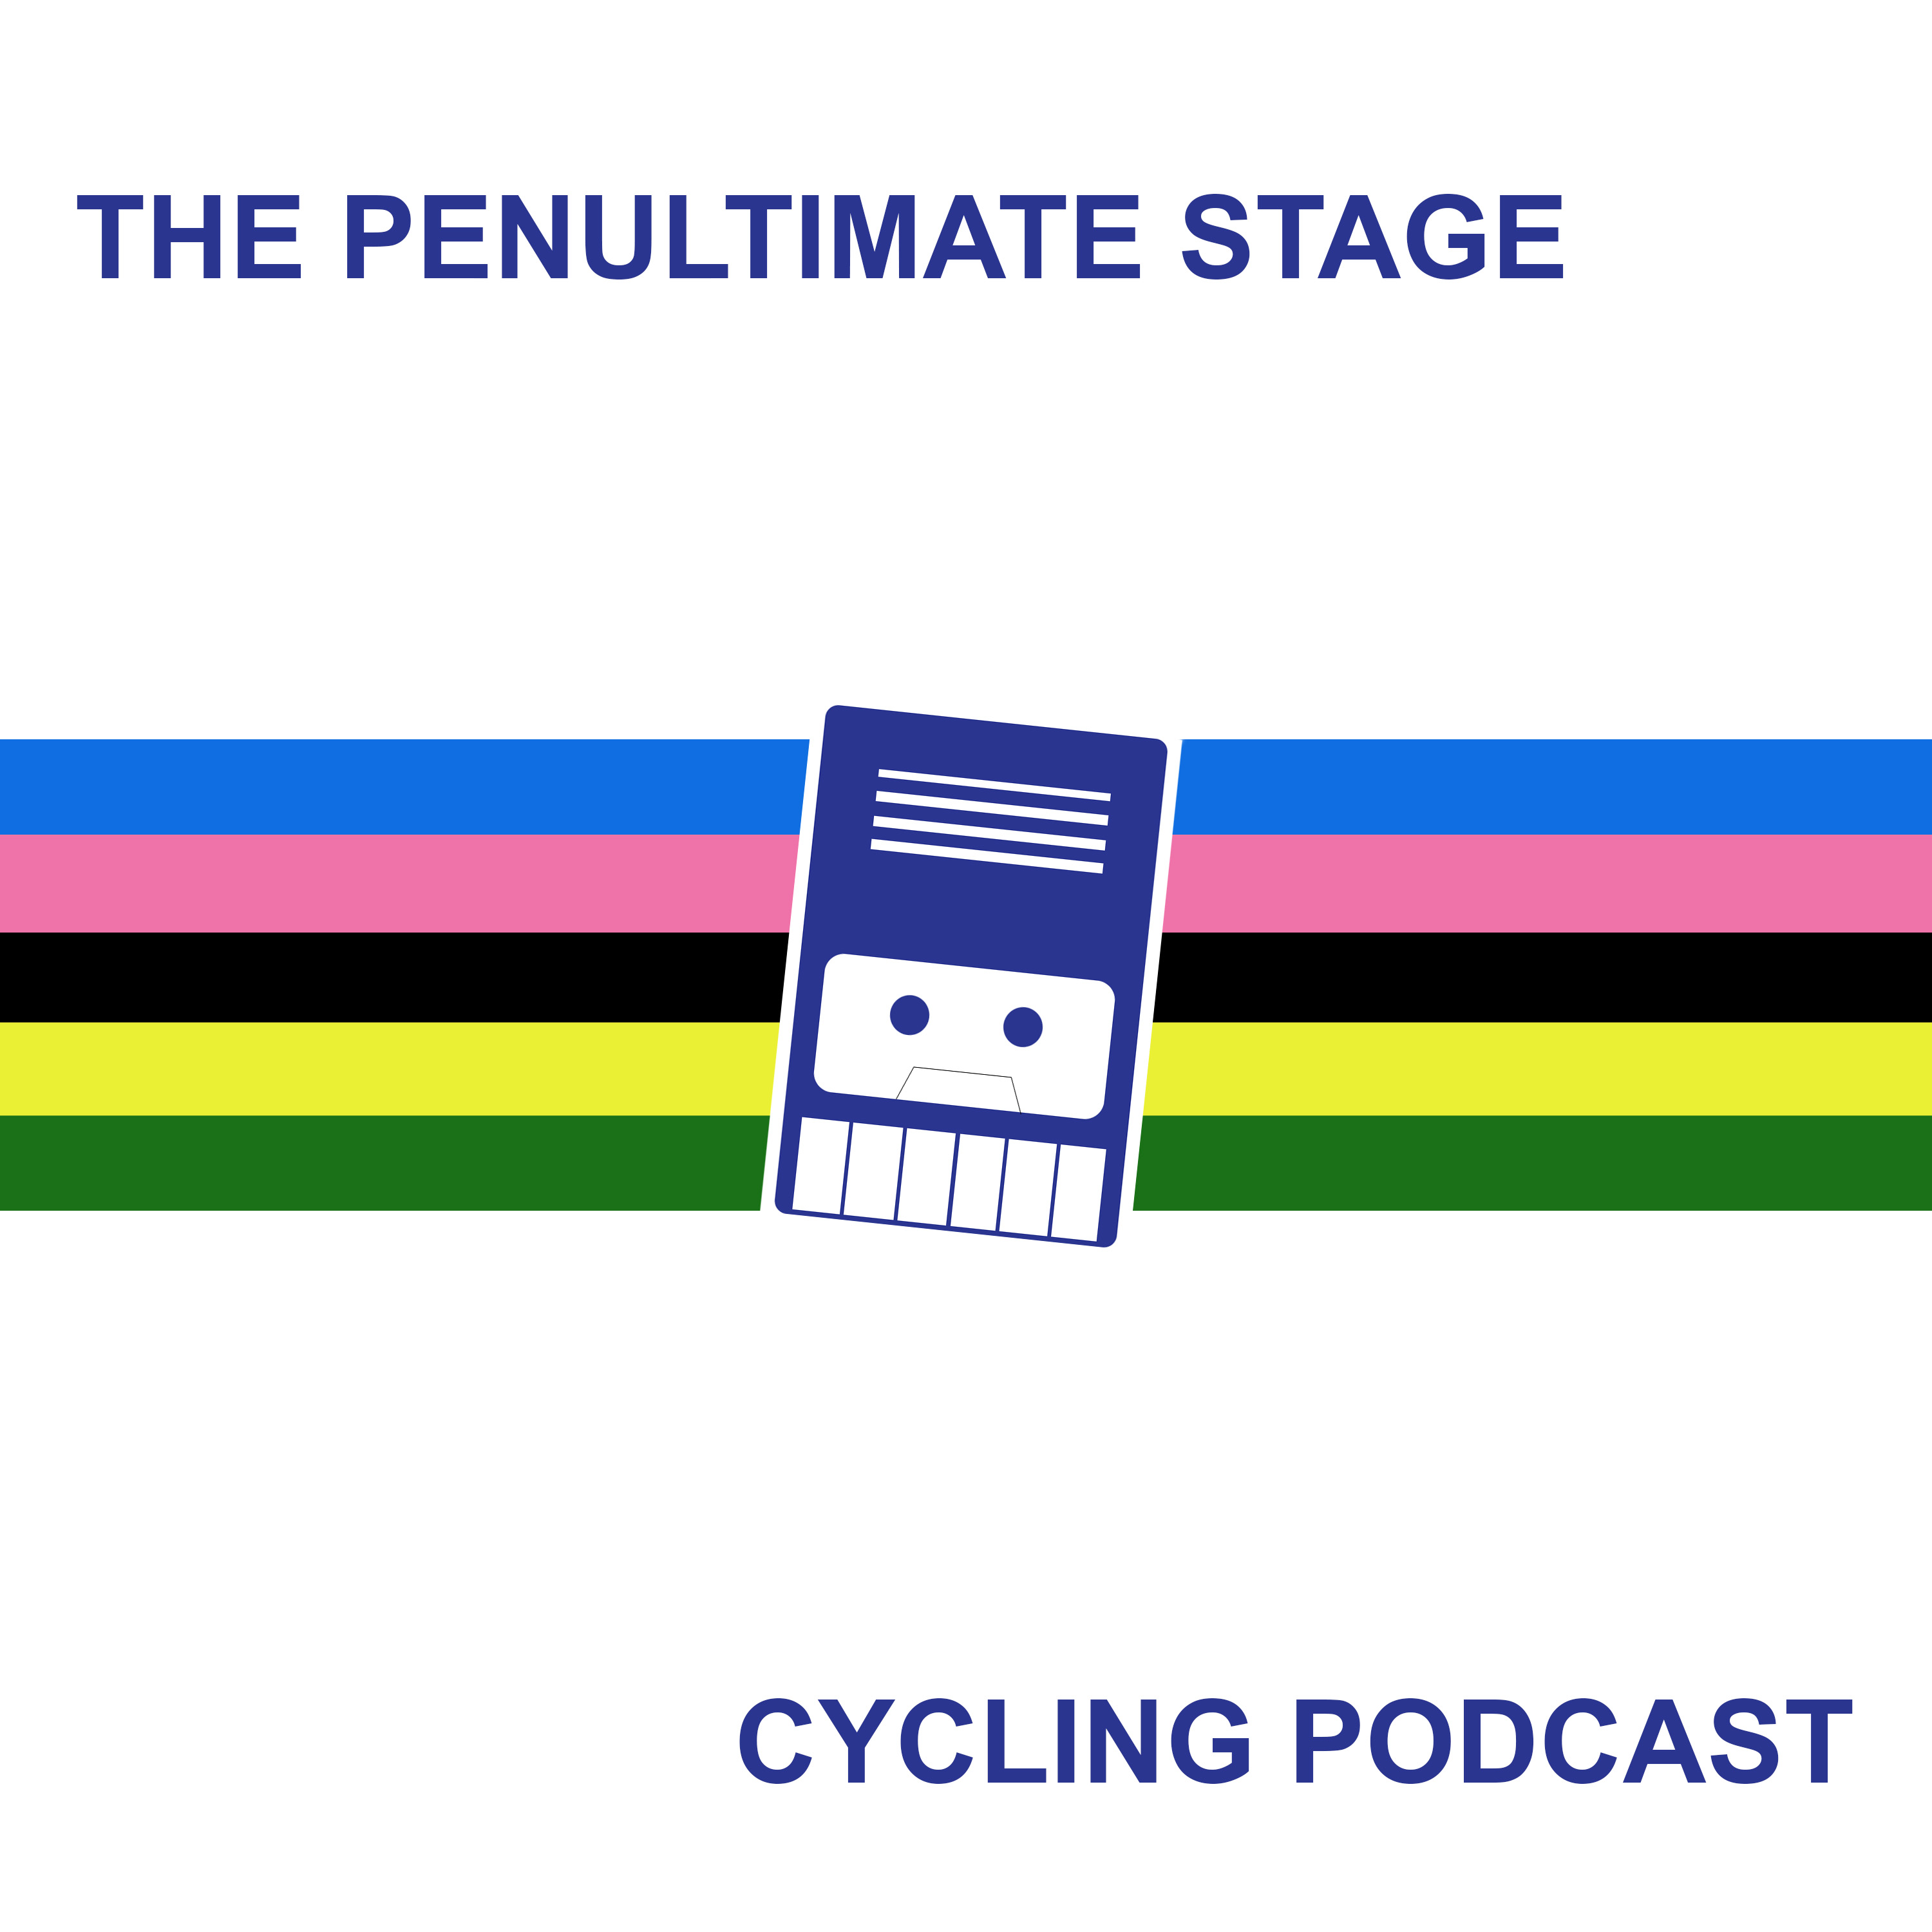 The Penultimate Stage Cycling Podcast